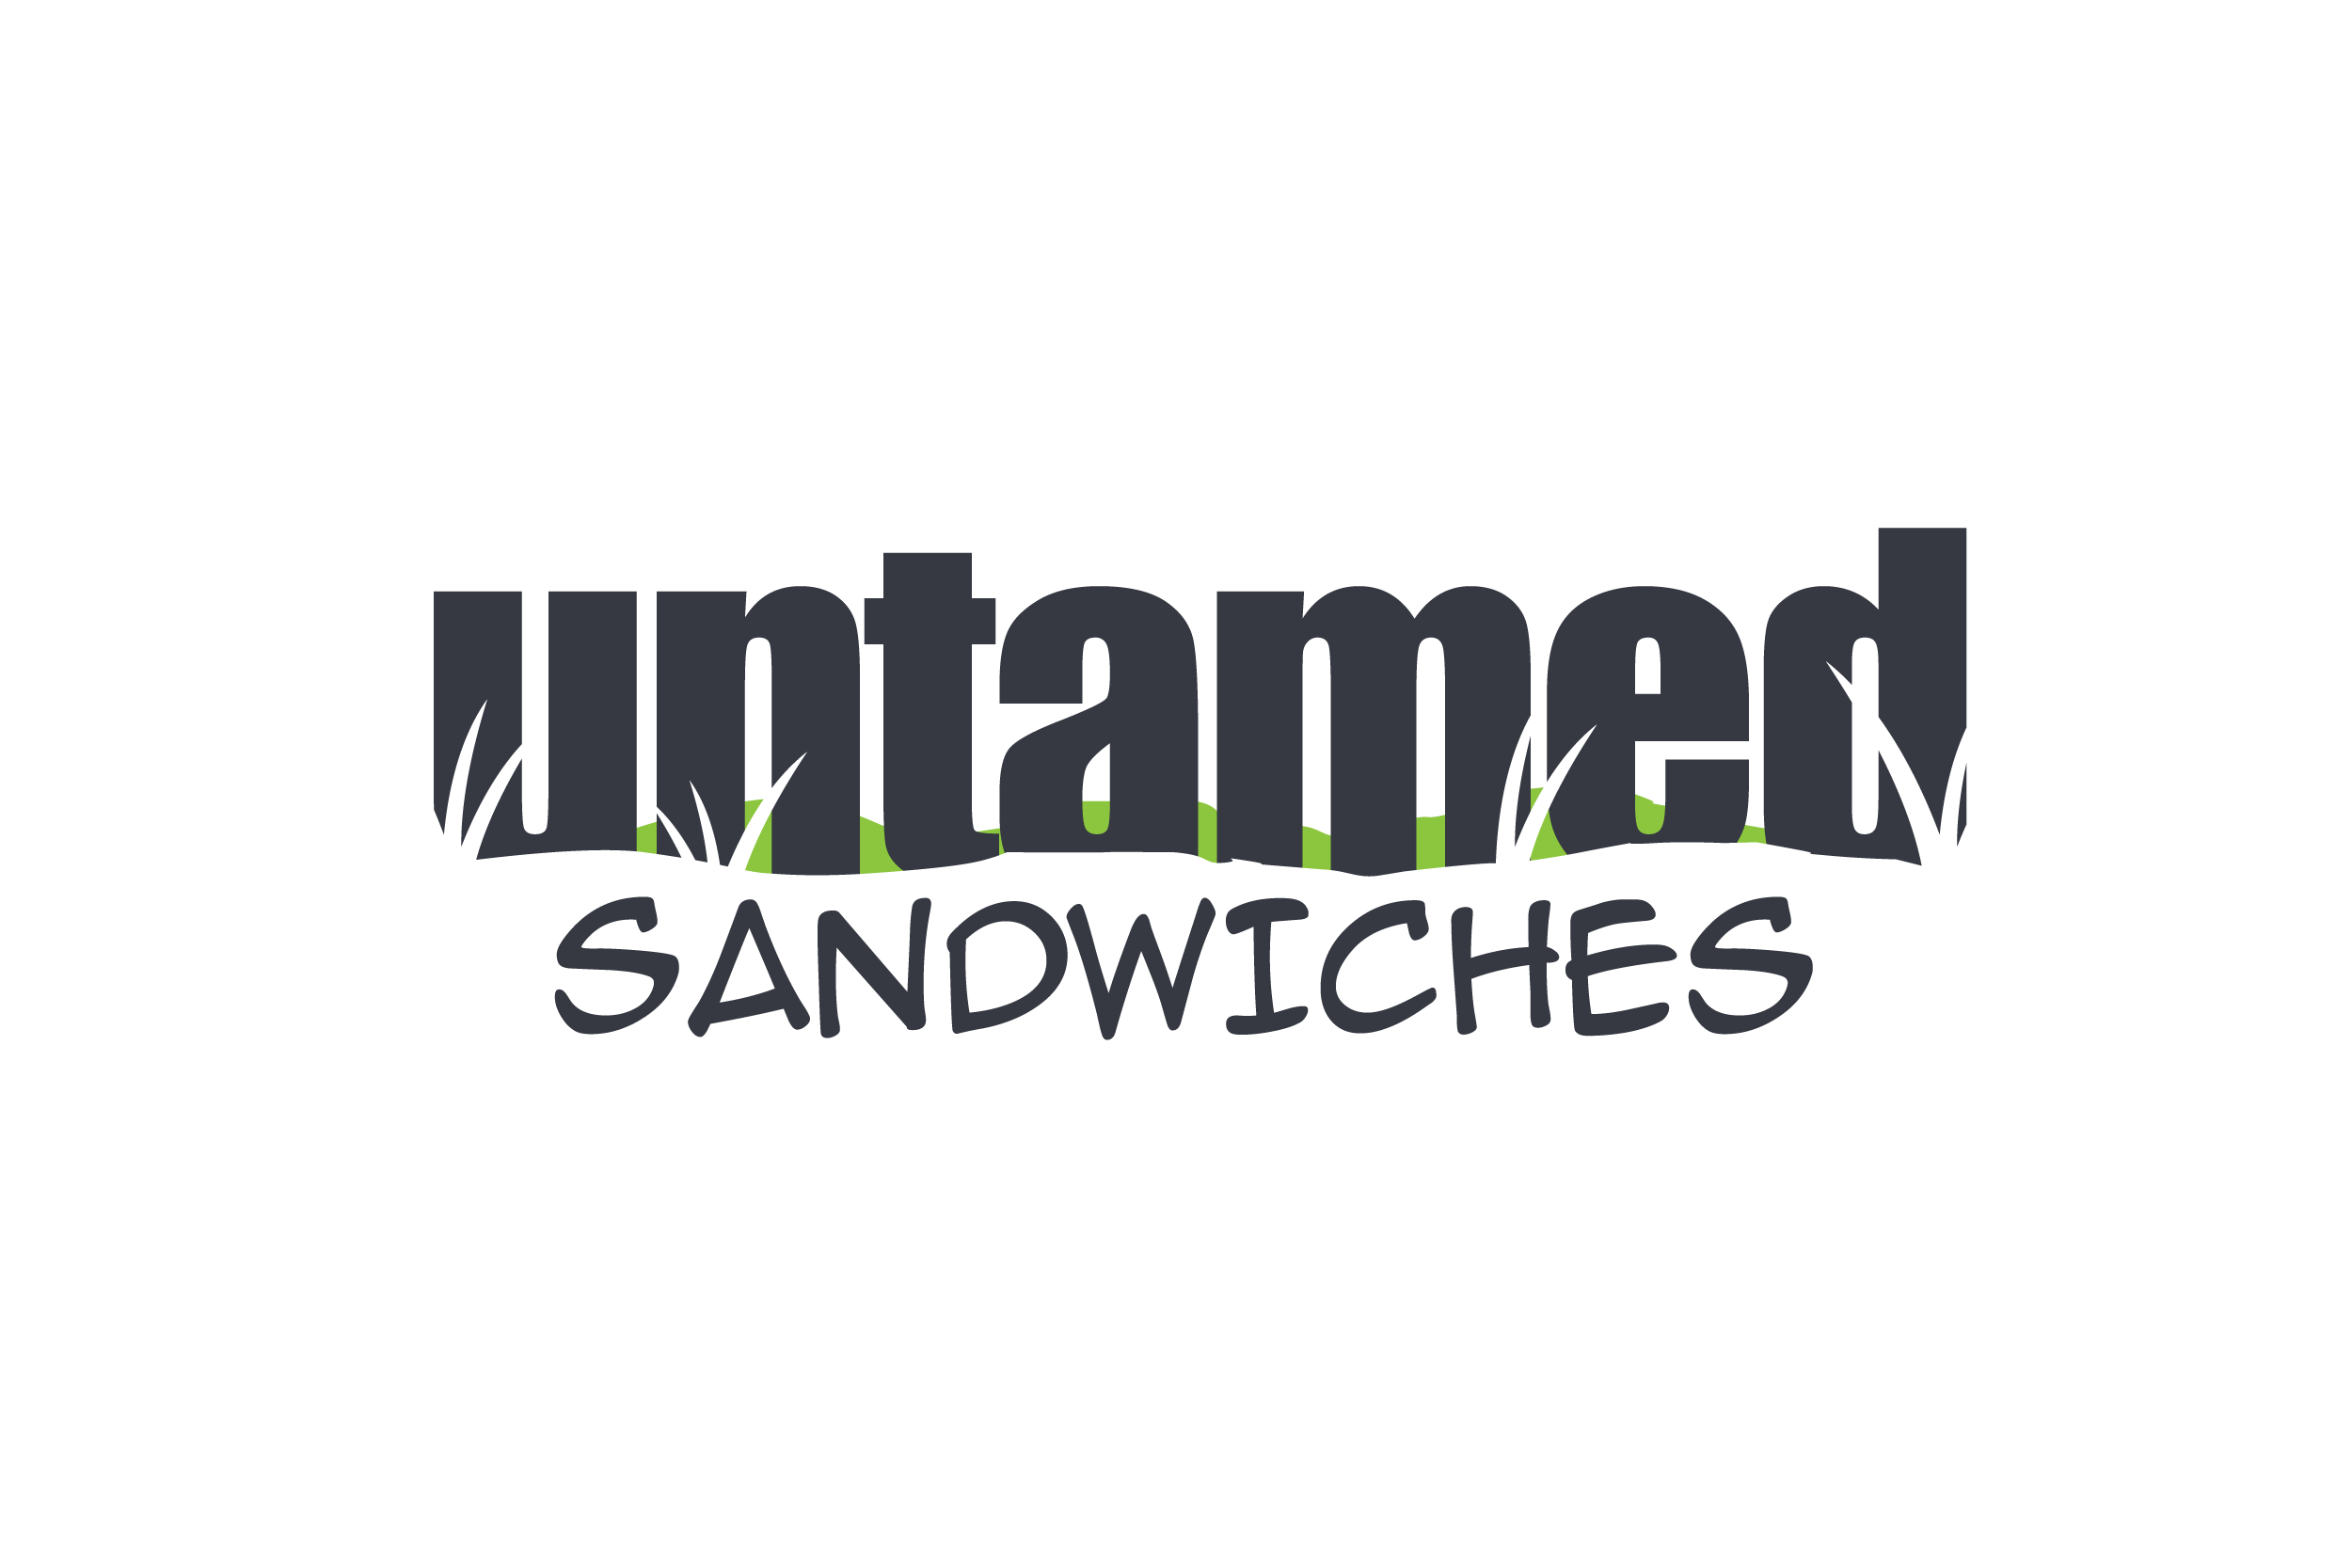 Episode 6: Andy Jacobi and Ricky King, Co-Founders of Untamed Sandwiches